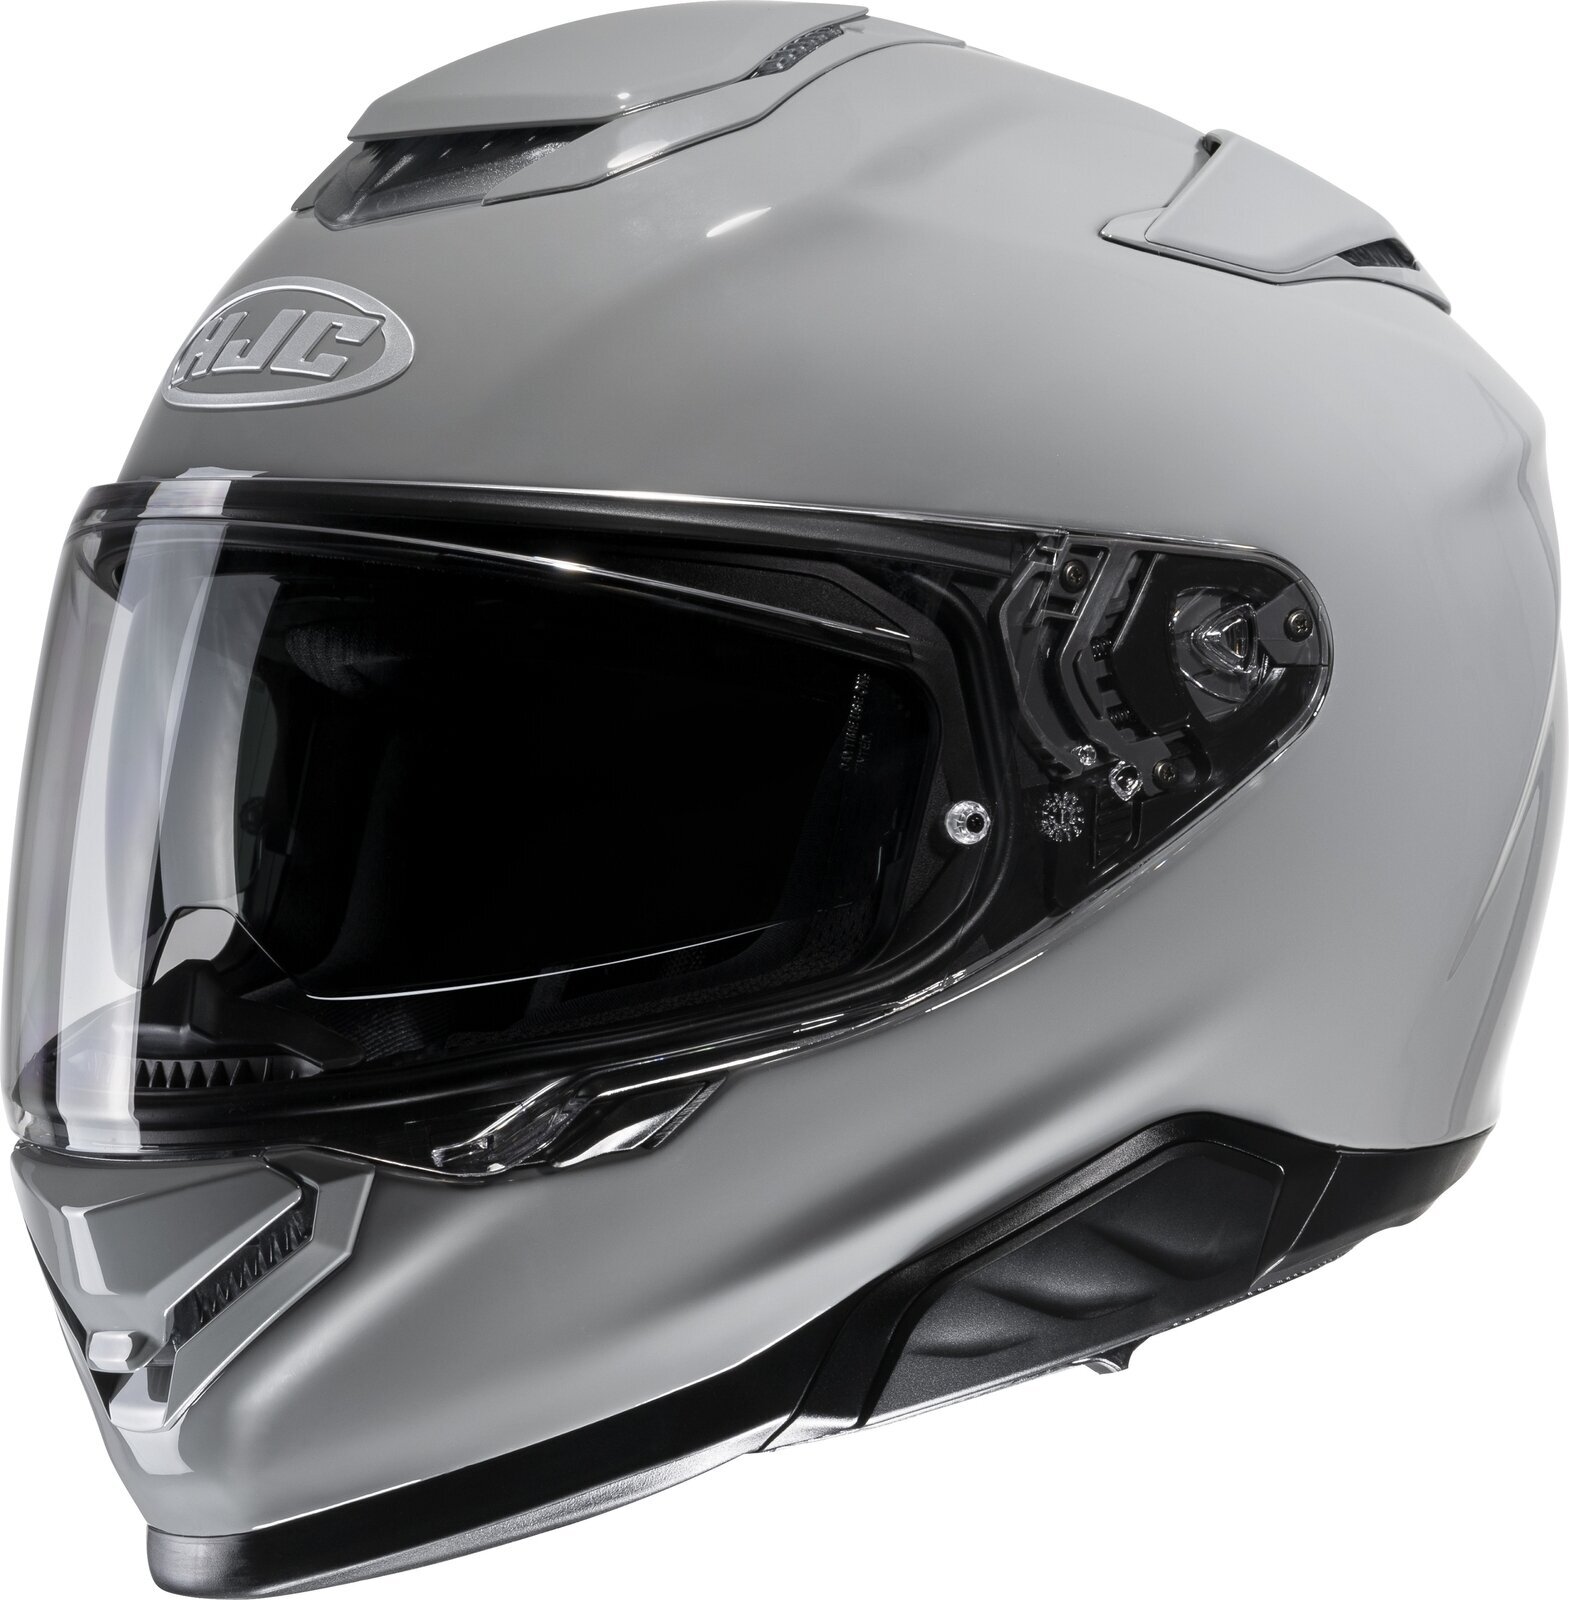 Casque HJC RPHA 71 Solid N.Grey S Casque